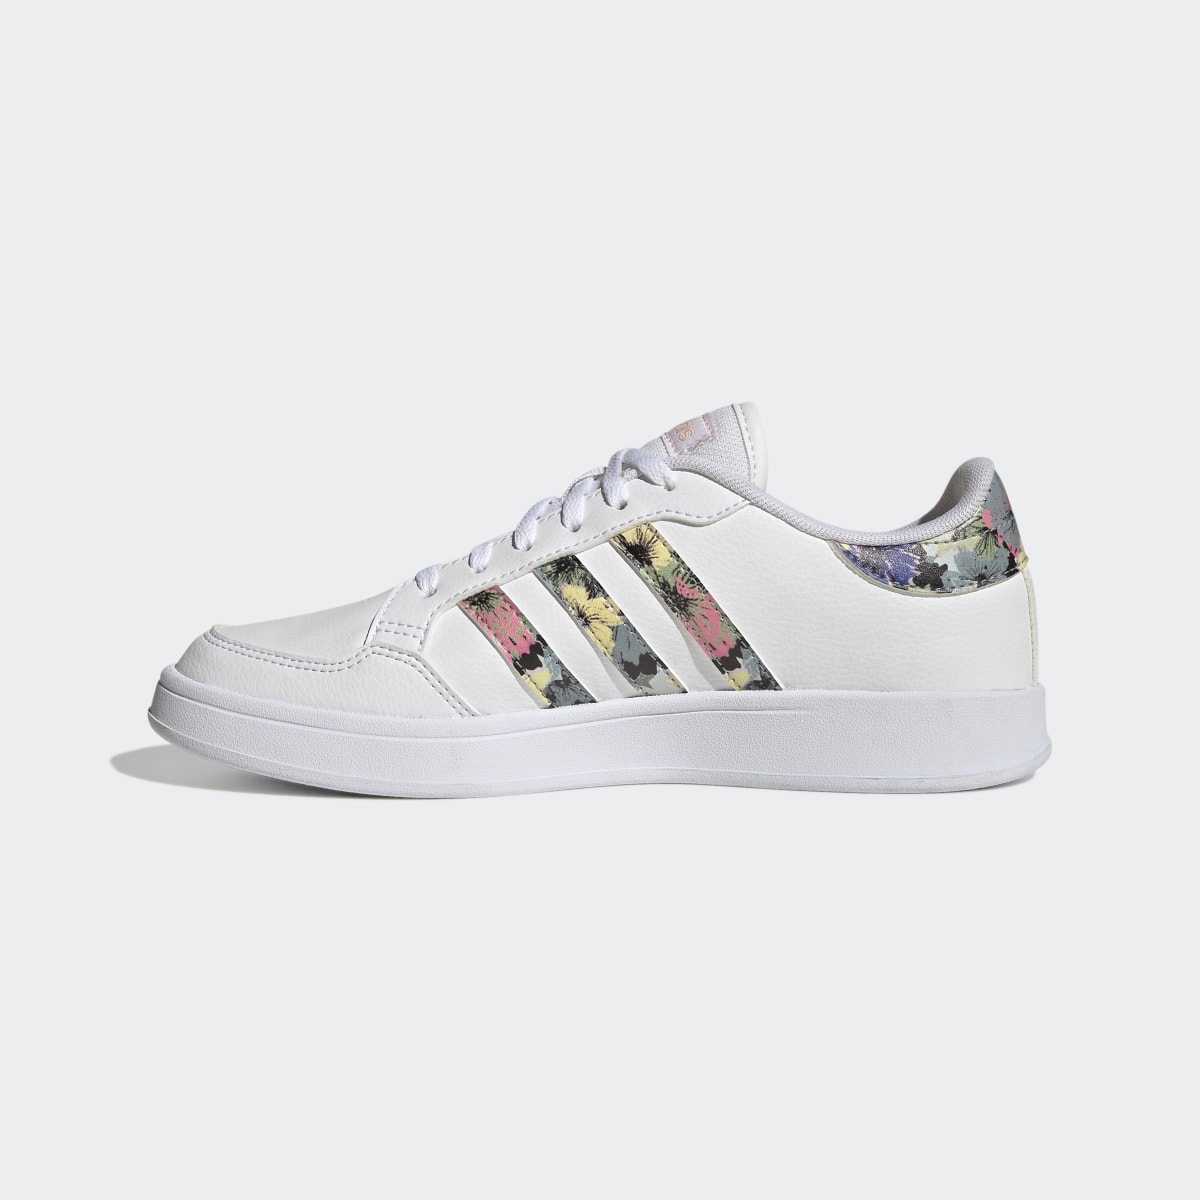 Adidas Breaknet Court Lifestyle Shoes. 7